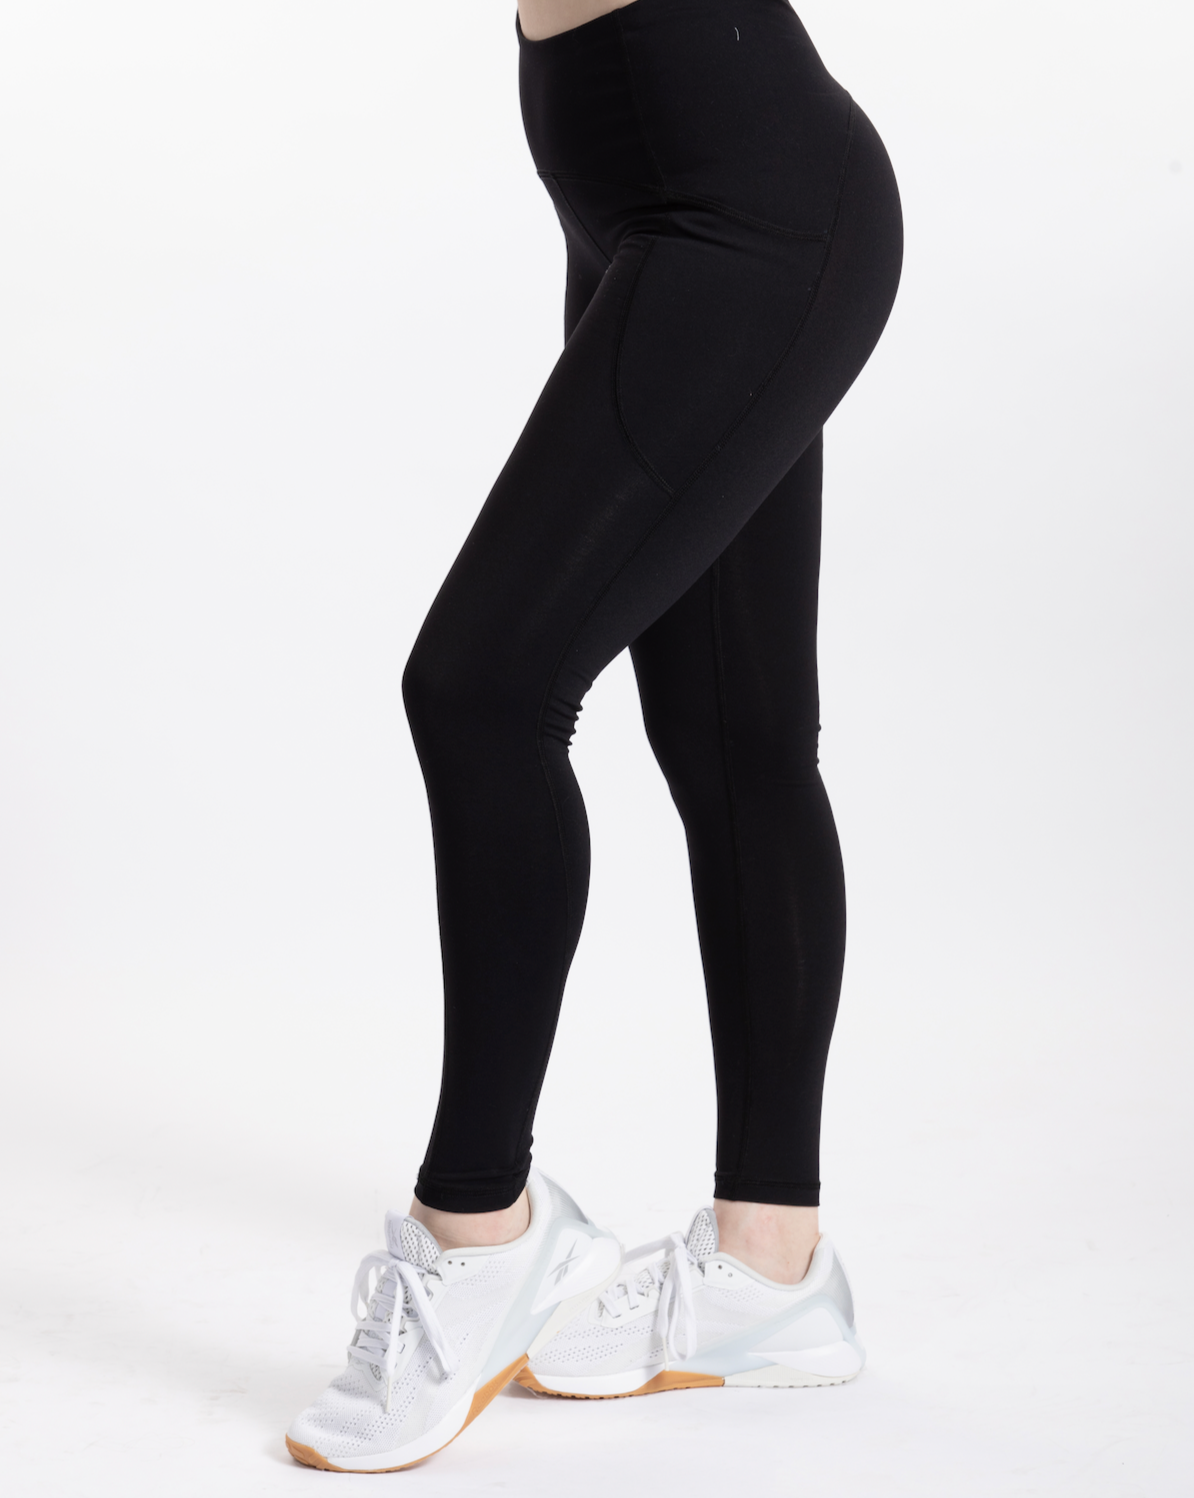 Oceanside Long Tights - Recovery Compression Leggings - UPF 50+